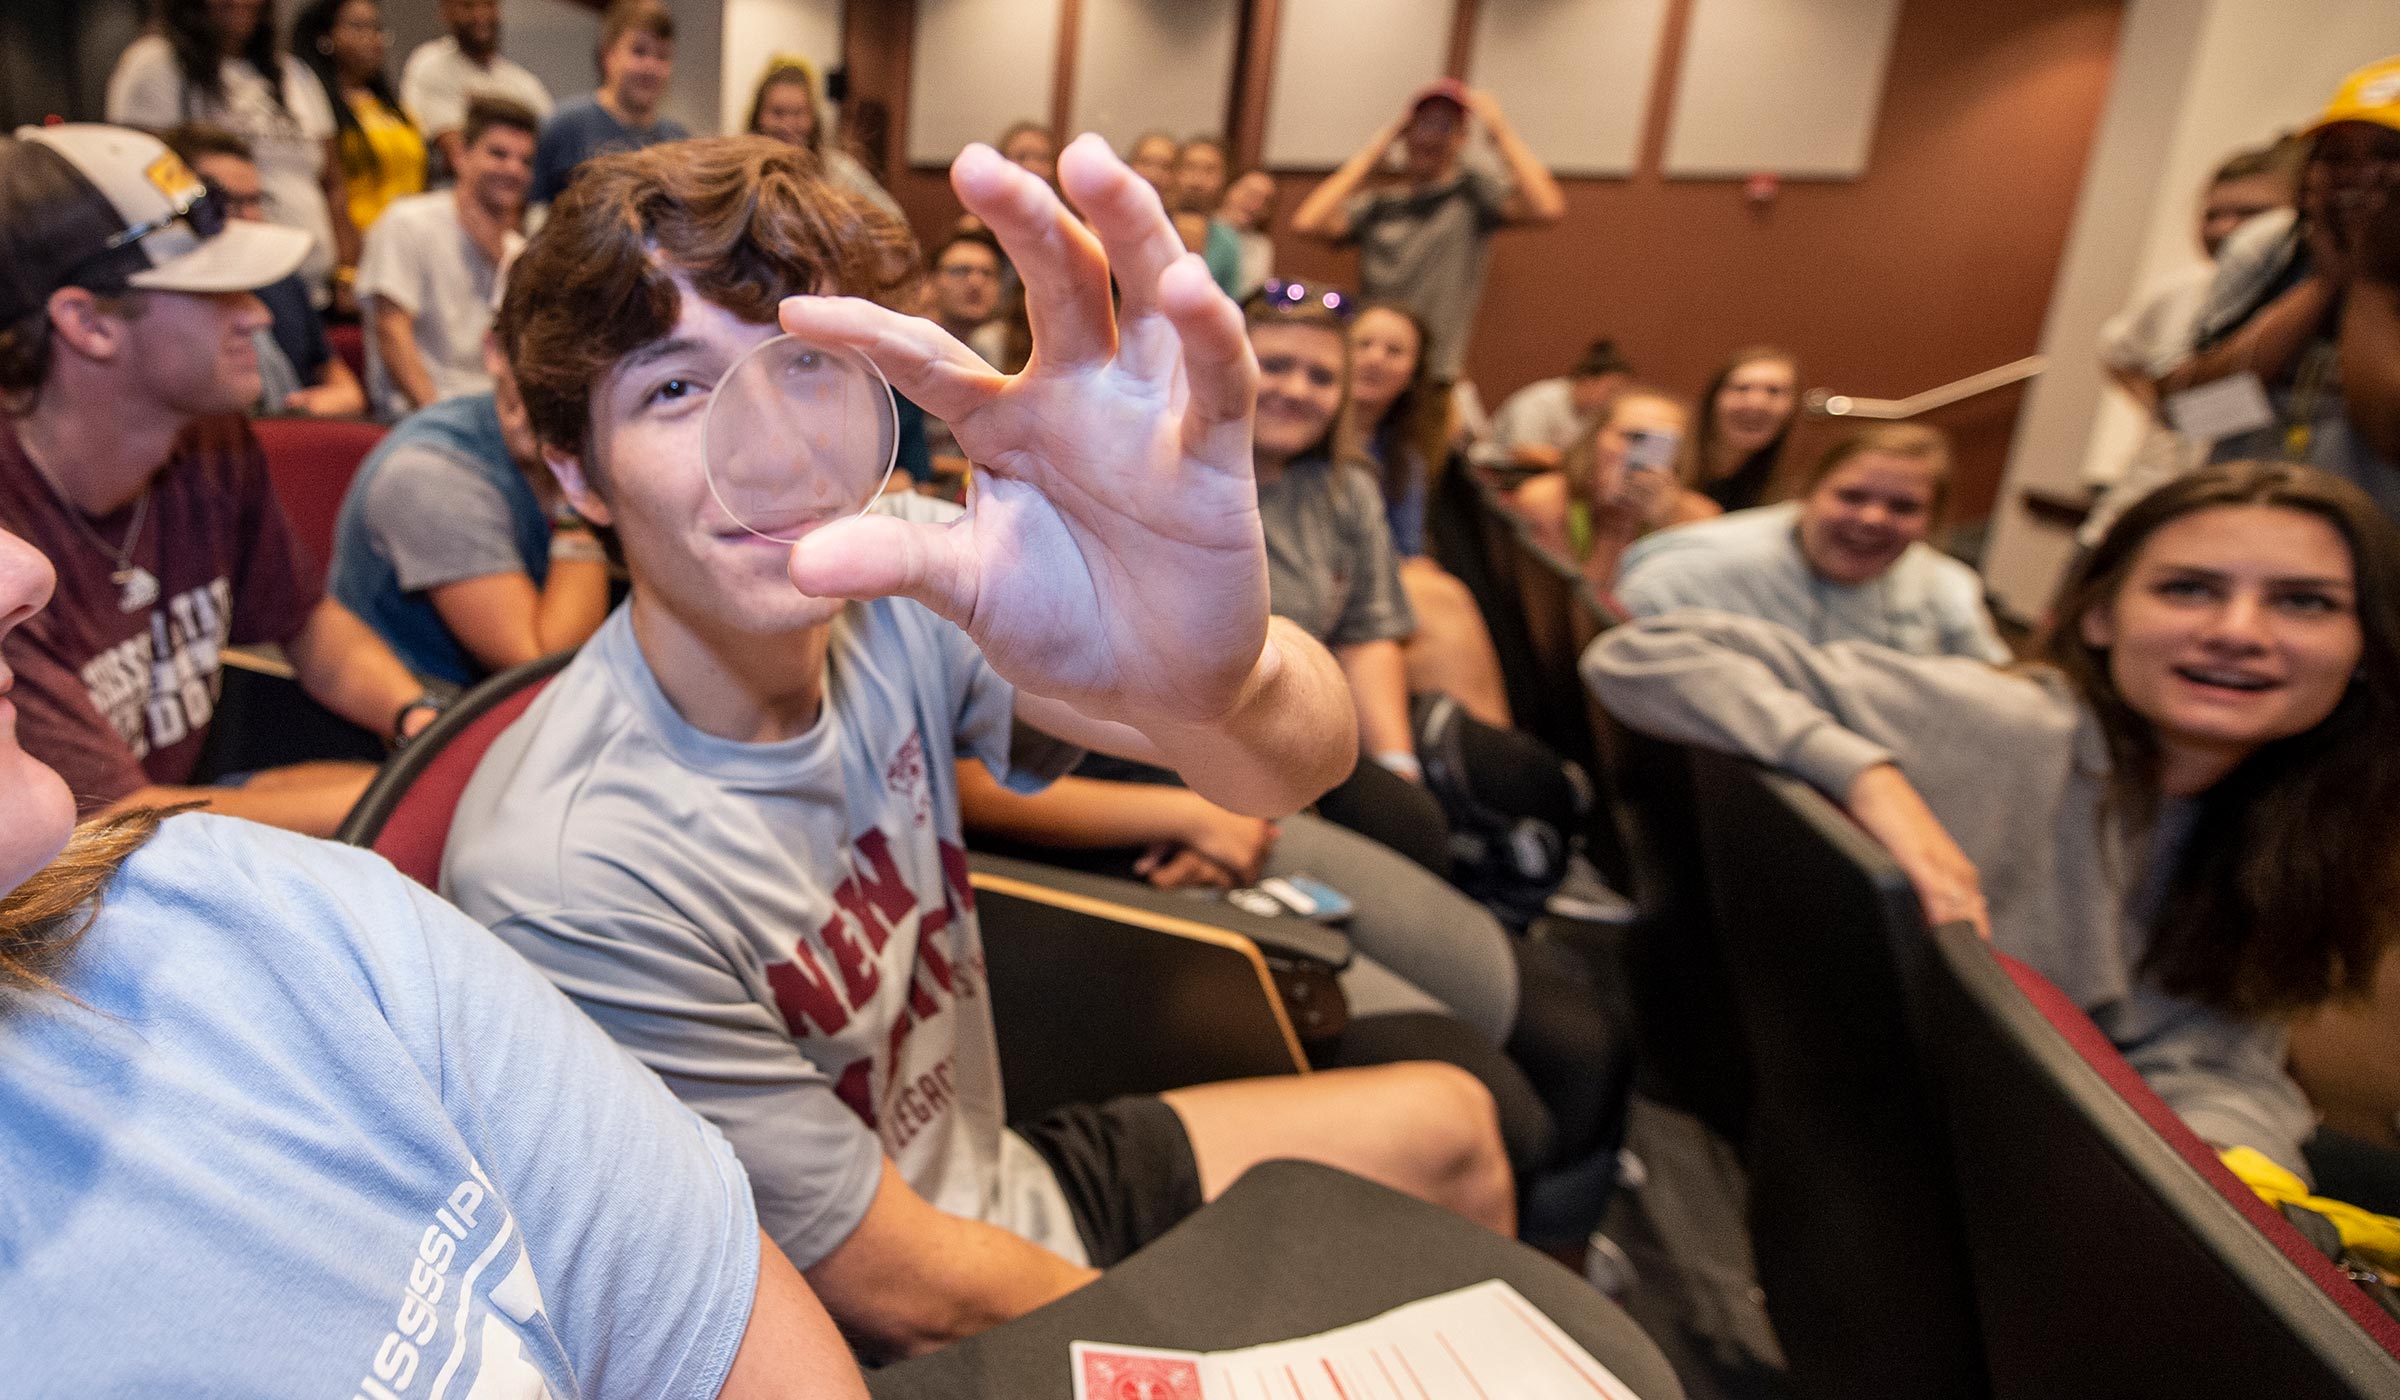 Sean Moskal is pictured during 2019’s New Maroon Camp, when he entertained students with magic tricks.